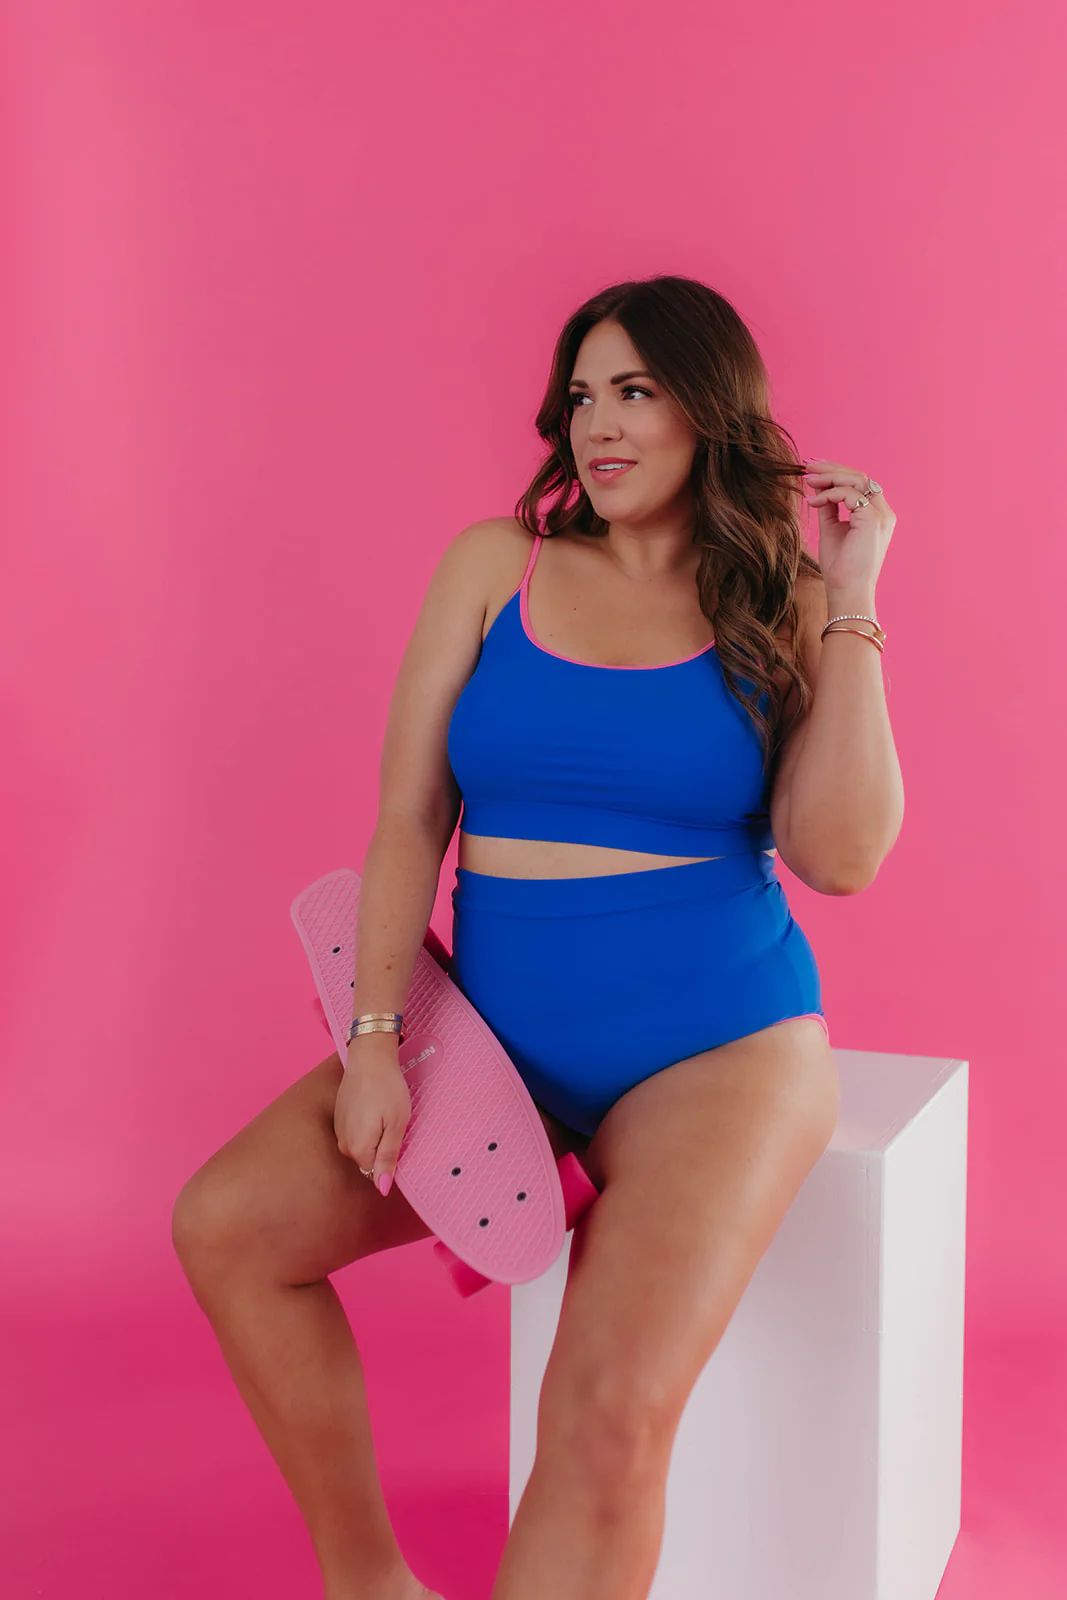 MALIBU TWO PIECE IN ROYAL BLUE AND ELECTRIC PINK TRIM BY PINK DESERT | Pink Desert